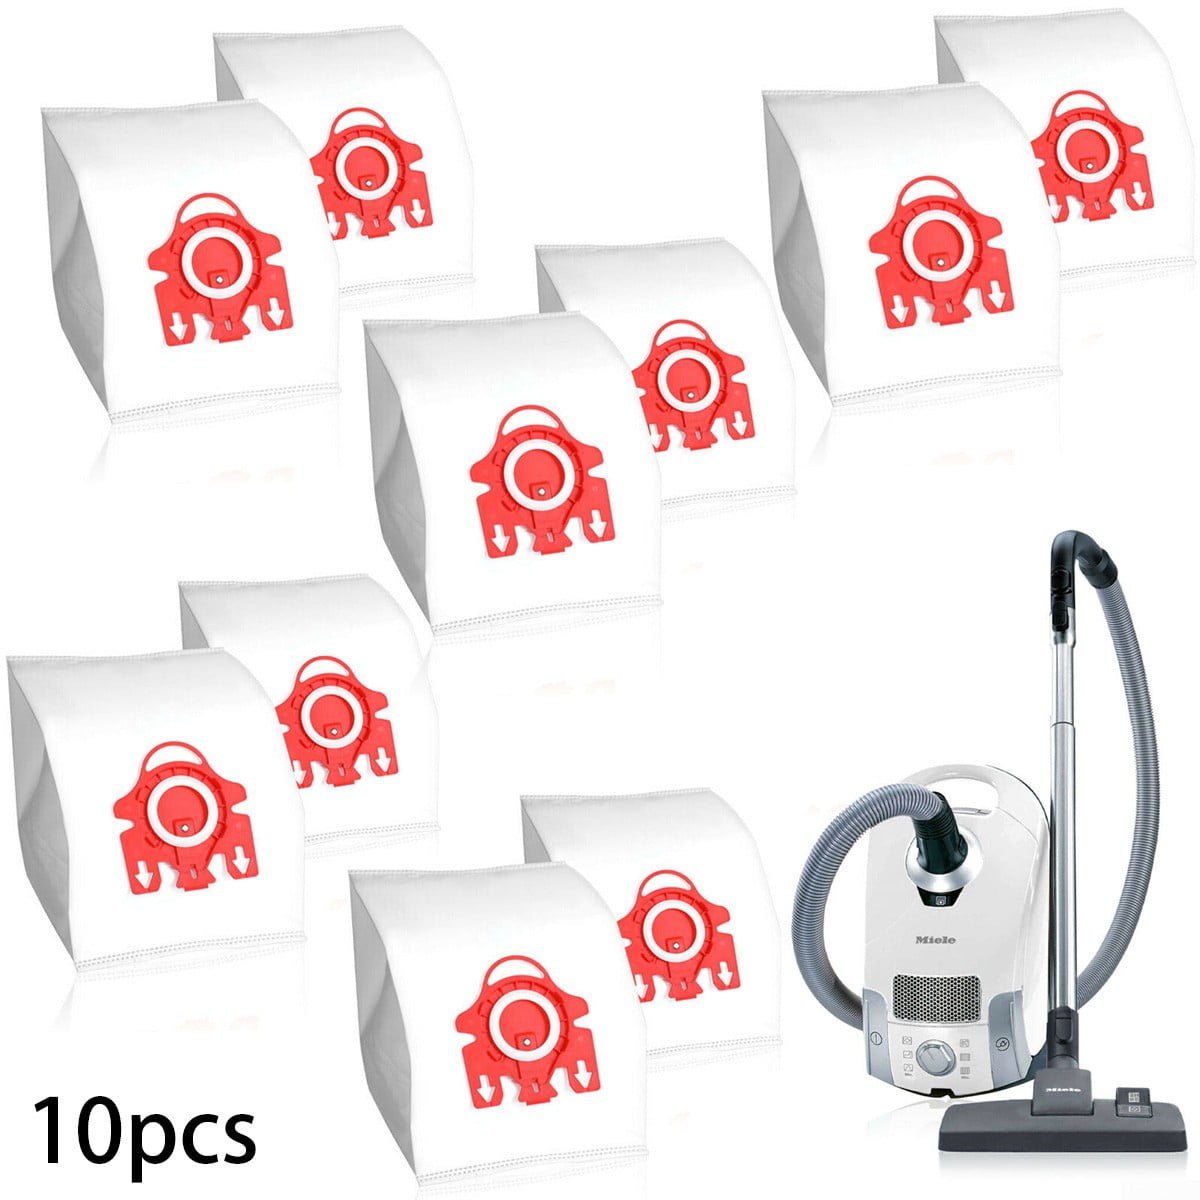 Pack of 10 S4000 S6000 Series Vacuum Cleaners FIND A SPARE Dust Bags to fit Miele Type FJM S700 